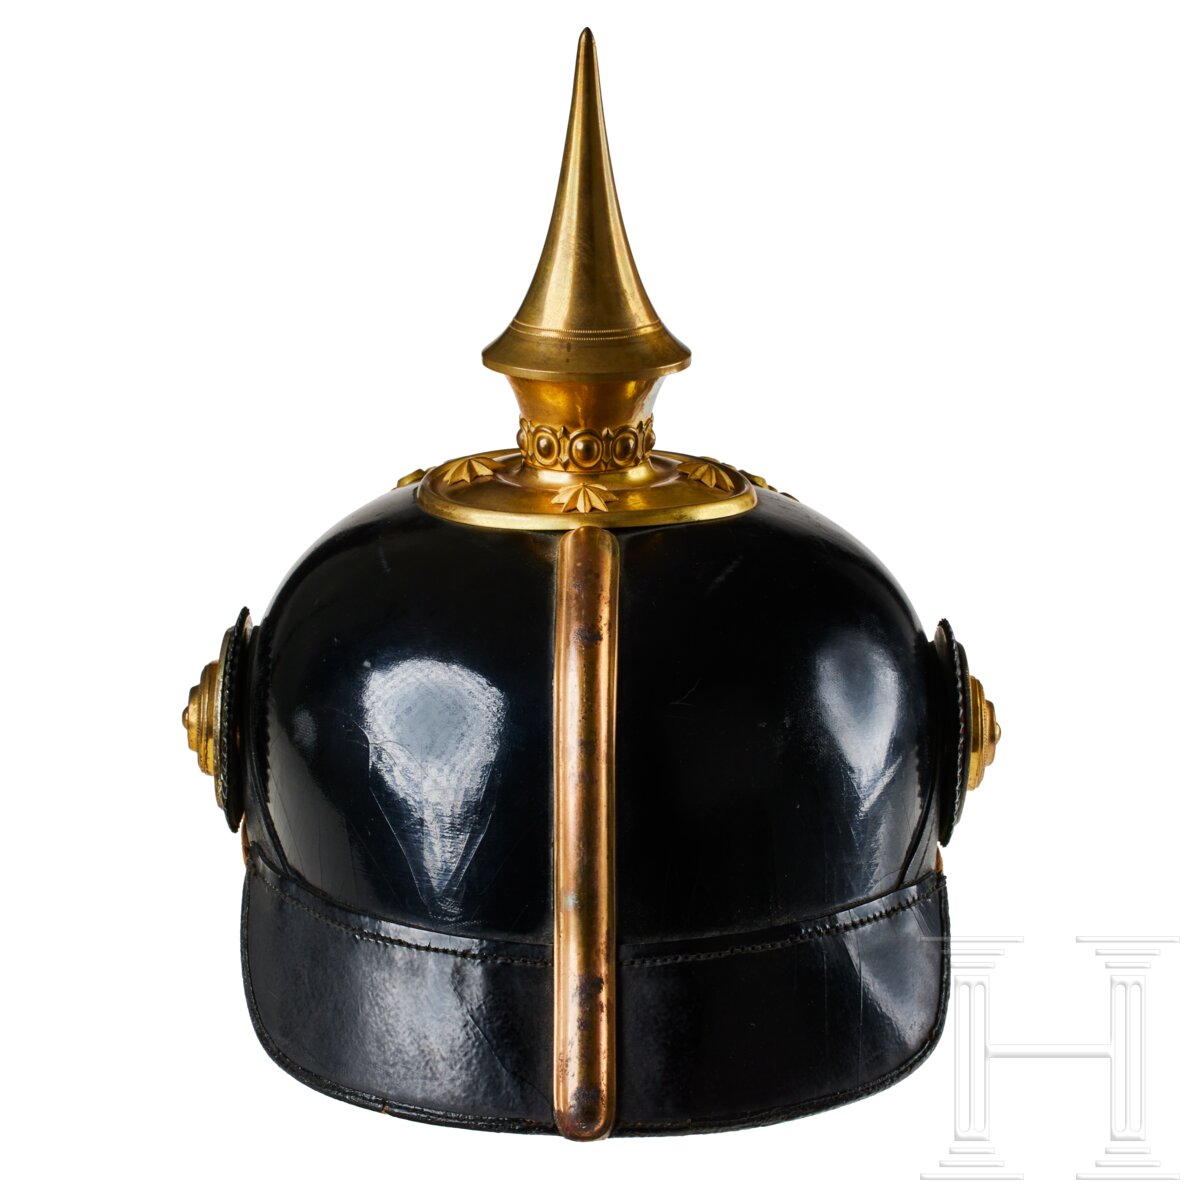 A helmet for Prussian IR 73 Officers - Image 5 of 8